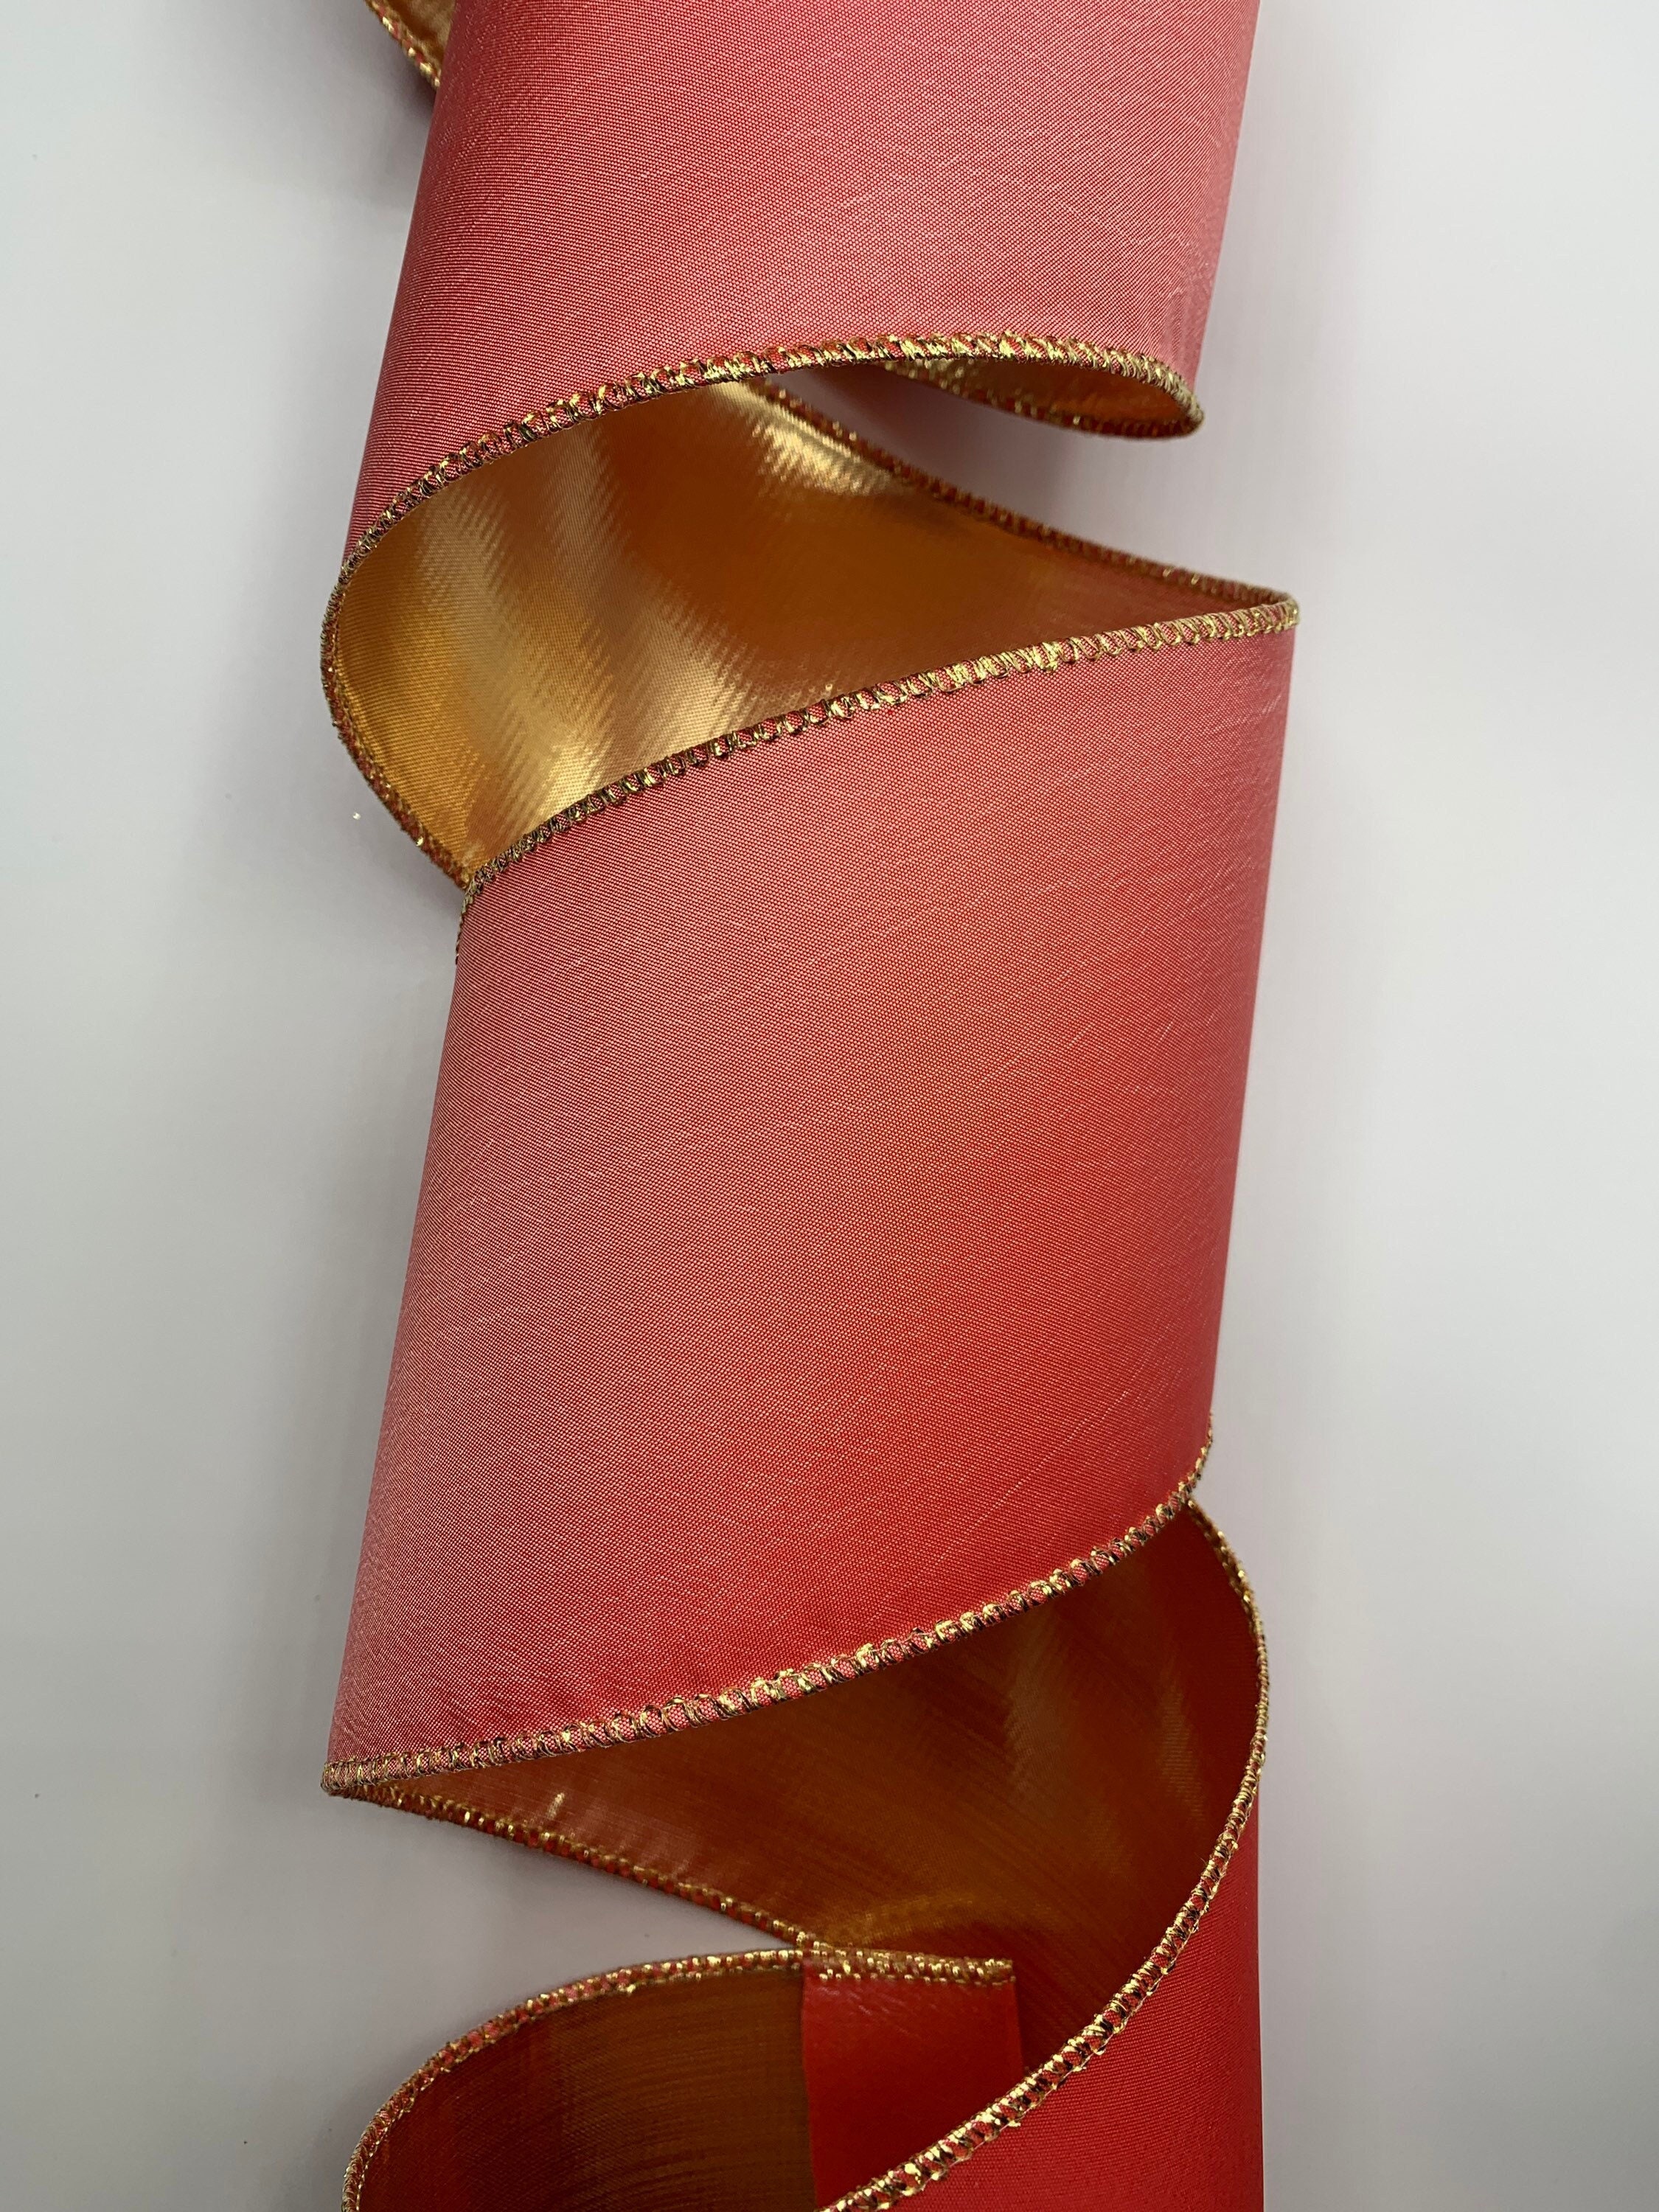 1 Burgundy and Gold Taffeta Wired Ribbon, D Stevens Ribbon, Burgundy Ribbon,  Burgundy and Gold Ribbon, Narrow Ribbon, Burgundy Wired Ribbon